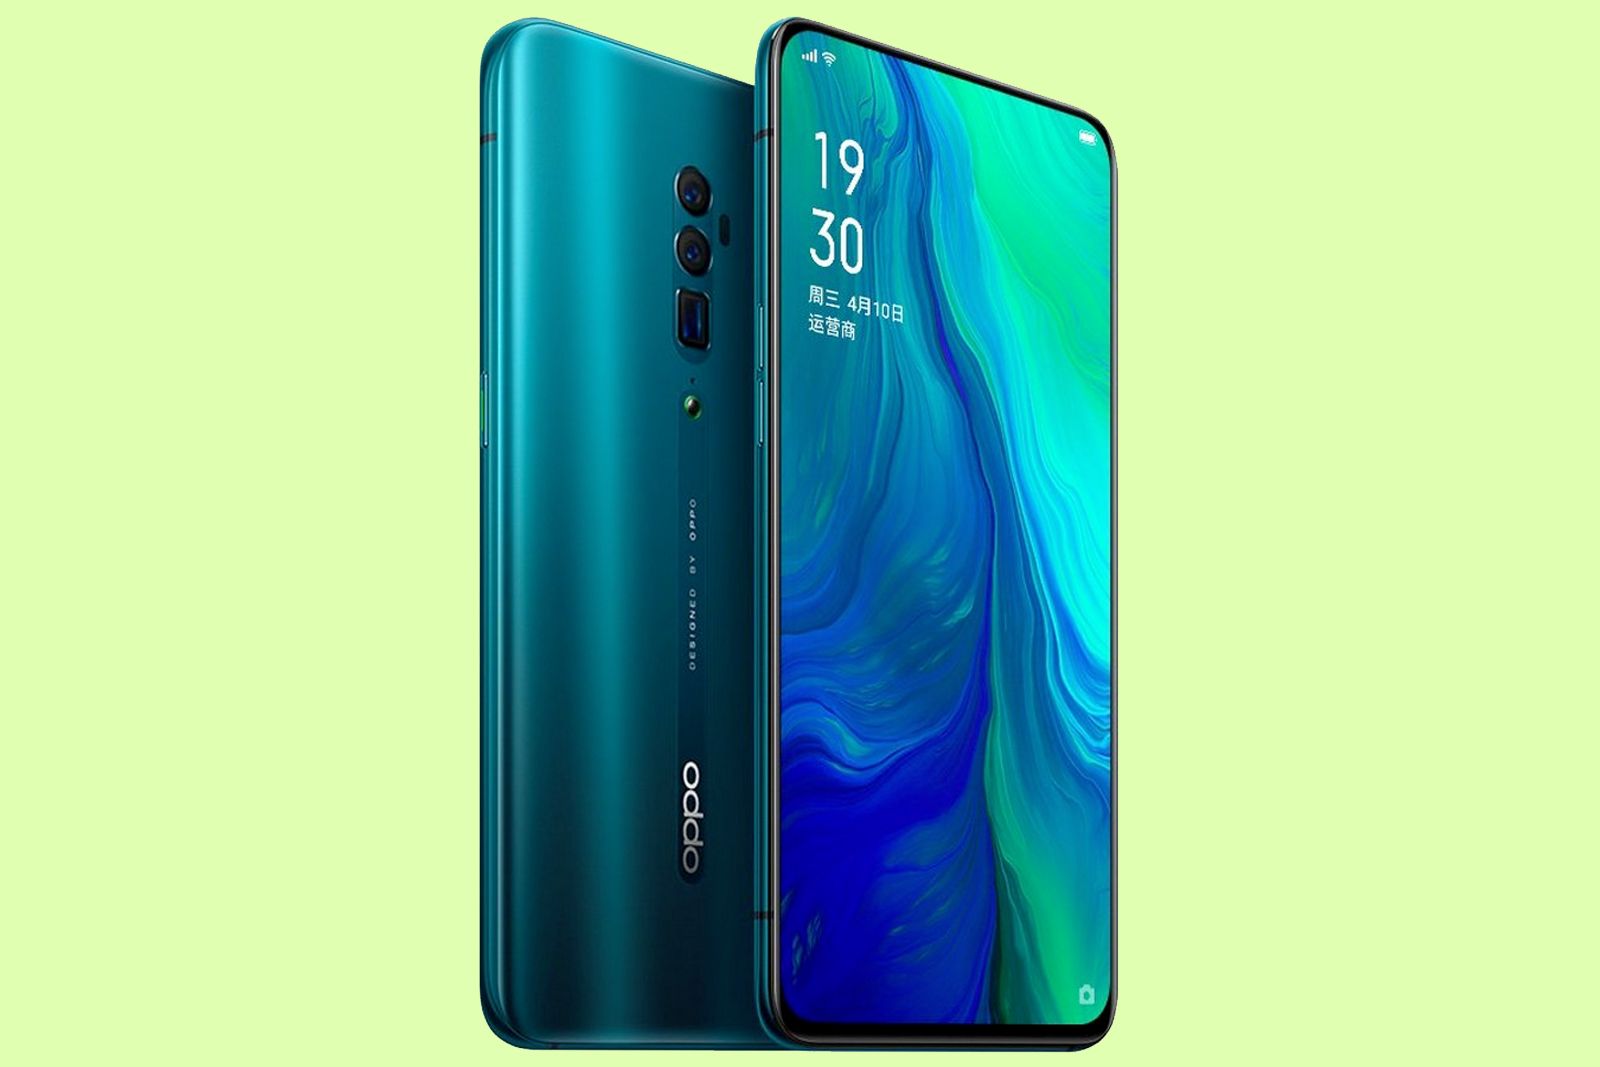 Oppo Reno 10x Zoom Vs Huawei P30 Pro Which Should You Choose image 4